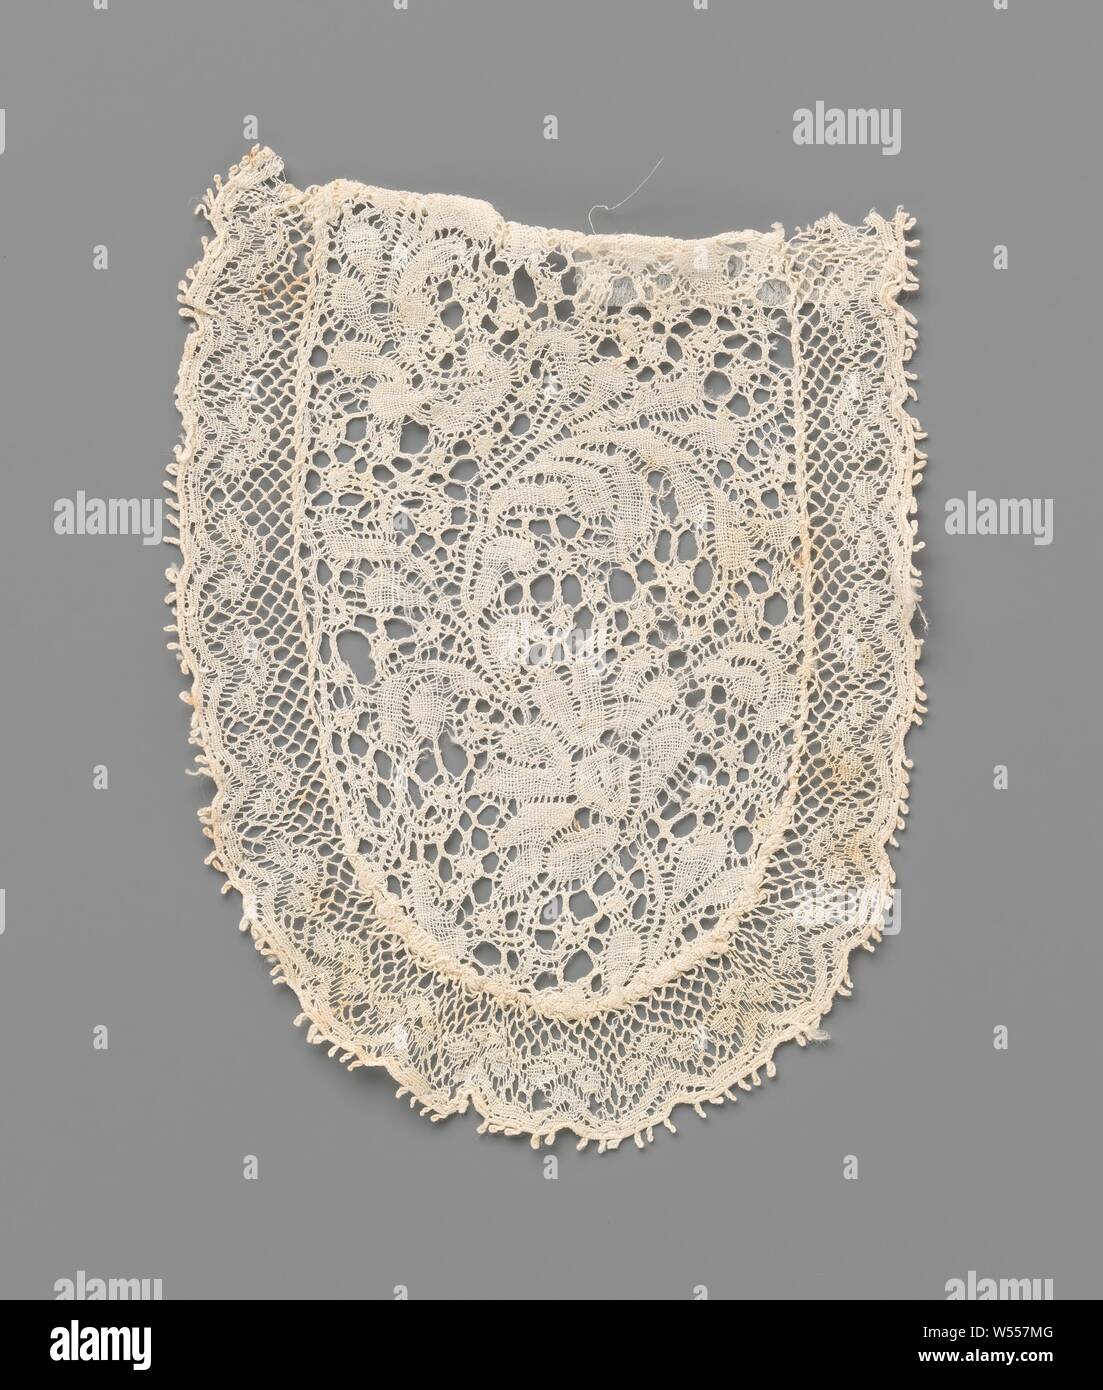 Bobbin lace jabot with a wave of a fan-shaped flower and feathered leaves, A small jabot of natural-colored bobbin lace, Binche lace with a Valenciennes lace edge. The model is rectangular with one rounded short side, like a half oval. The Binche lace pattern consists of a curved flower stem, with a fan-shaped flower, from which a large feathered leaf rises that deflects in the opposite direction. The motifs are connected by a decorative ground, a snow ground. The motifs are made in linen with openwork edges. The straight short side is finished with a hem. The other sides are finished Stock Photo